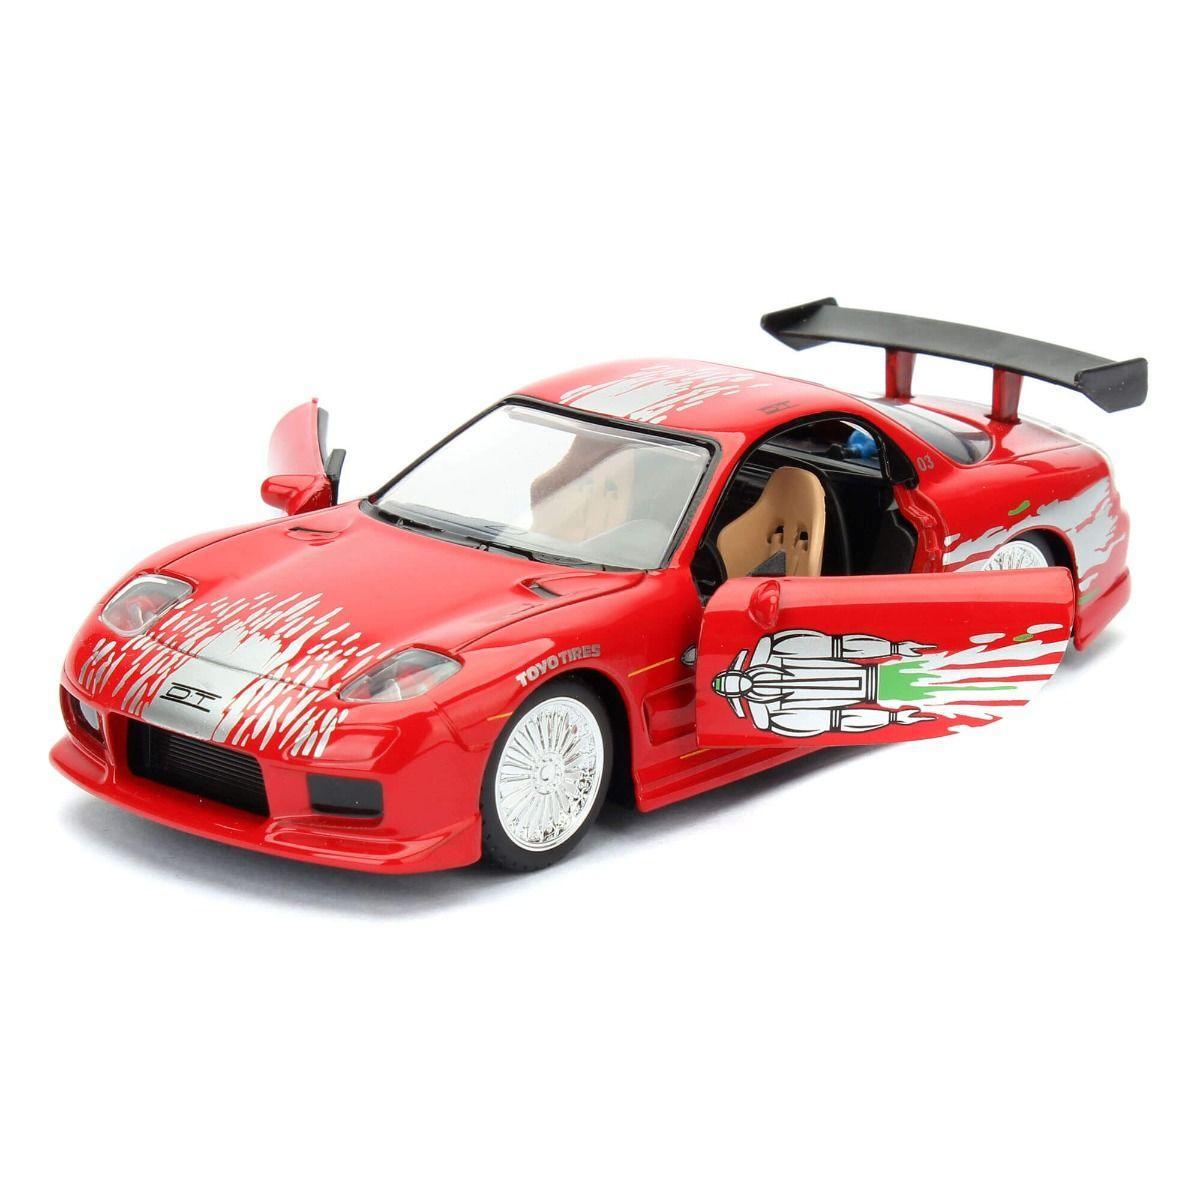 JAD98377 Fast and Furious - Dom's Mazda RX-7 1:32 Scale Hollywood Ride - Jada Toys - Titan Pop Culture